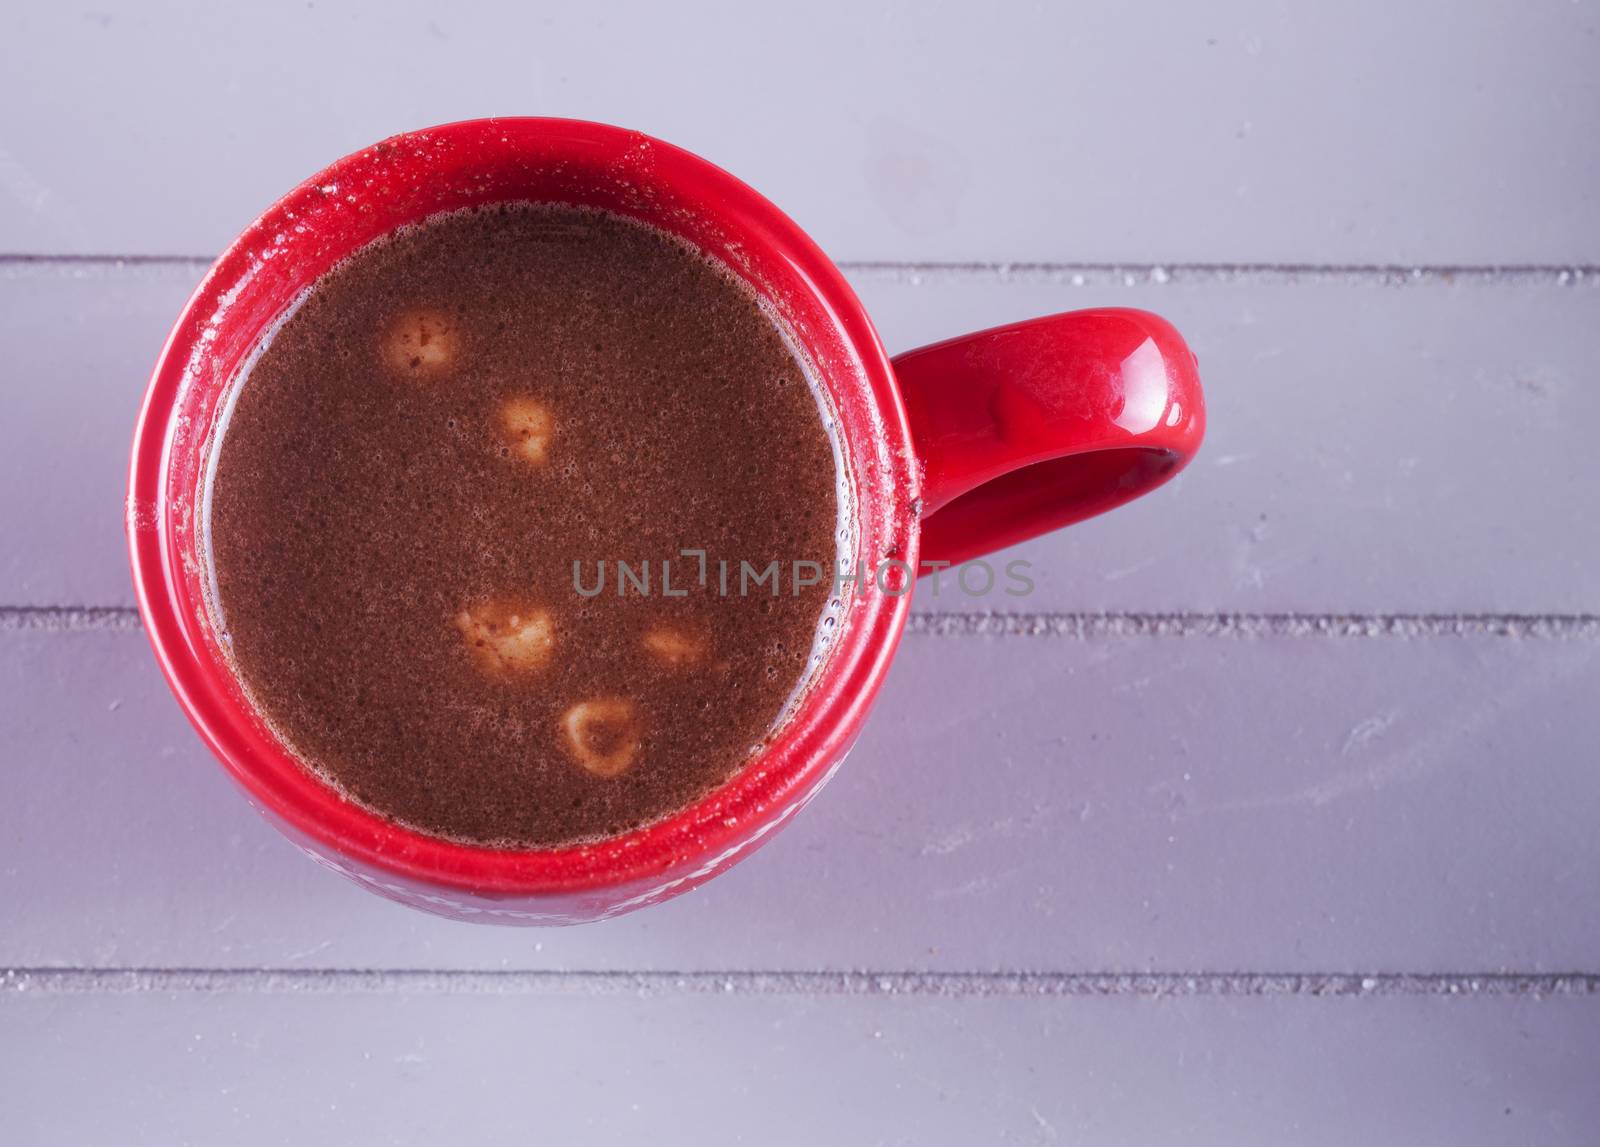 Chocolate and hazelnuts in red cup, over wooden background
